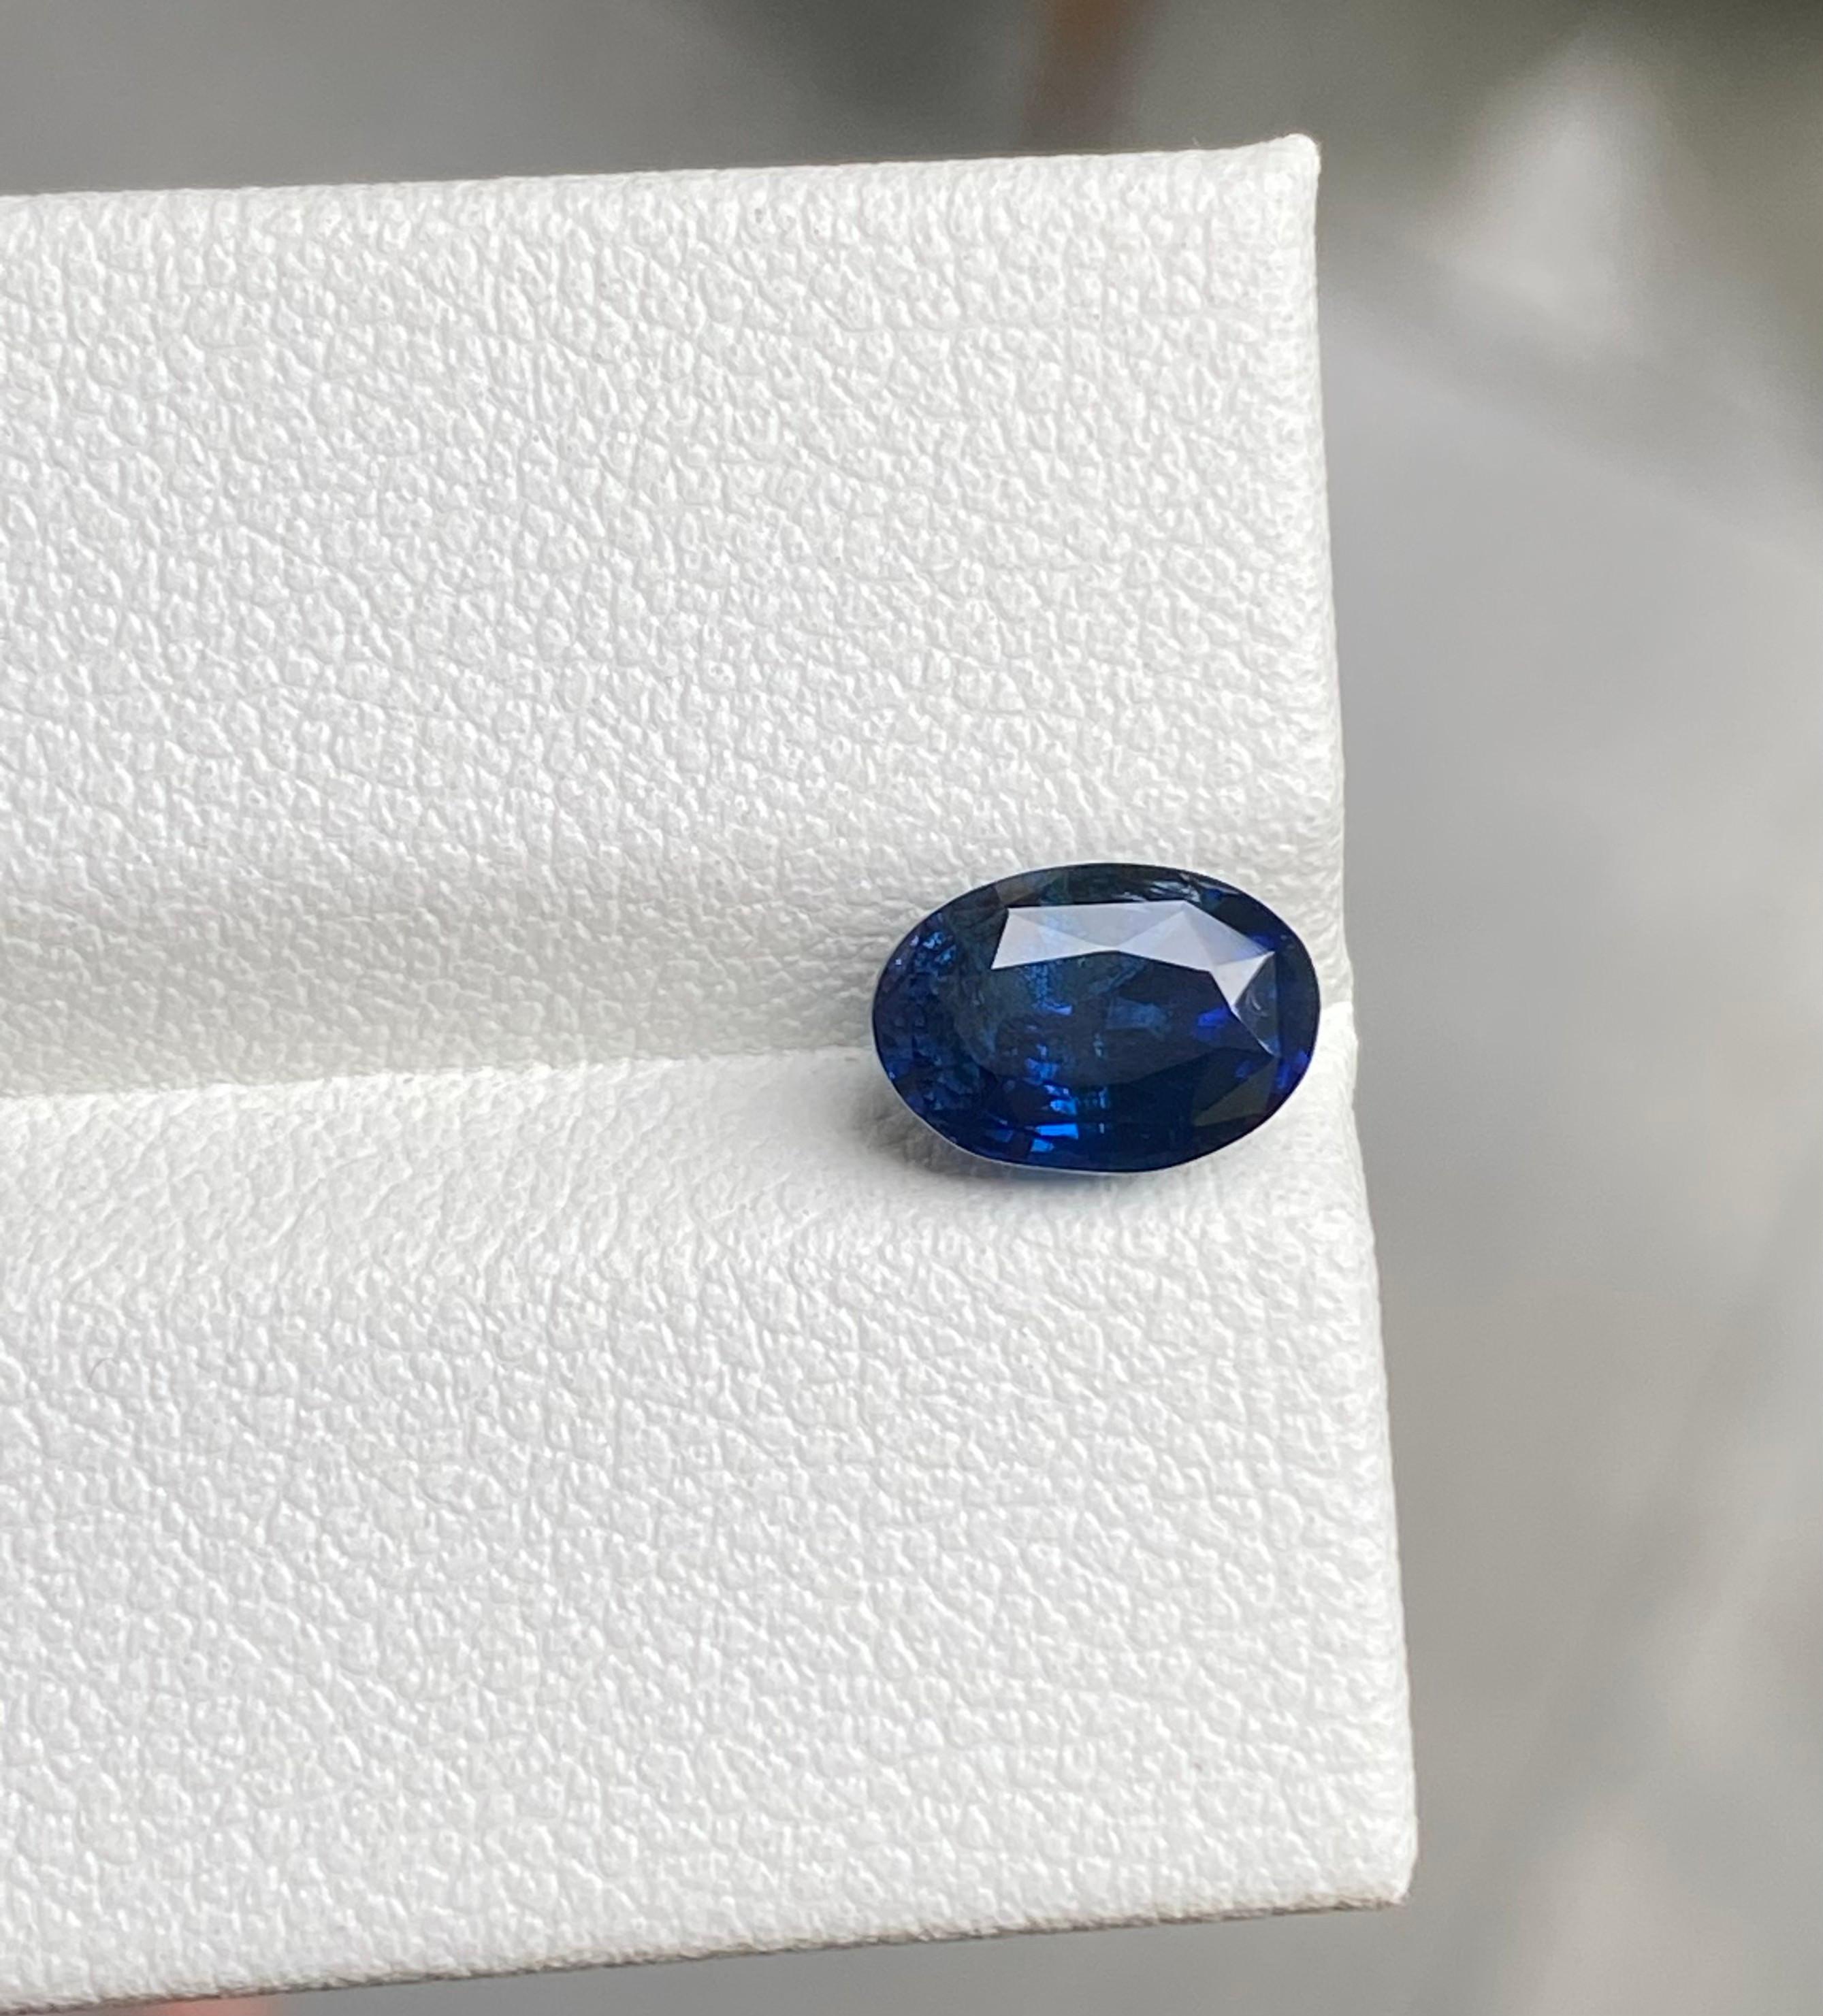 Ceylon Royal Blue sapphire 2.10 Carats unheated come with rich Royal blue color and luster and perfect cut, unheated 

• Variety: Sapphire
• Origin: Sri Lanka (Ceylon)
• Color(s): royal blue
• Shape/Cutting Style: Oval
• Dimensions: 10.8mm x 7mm x